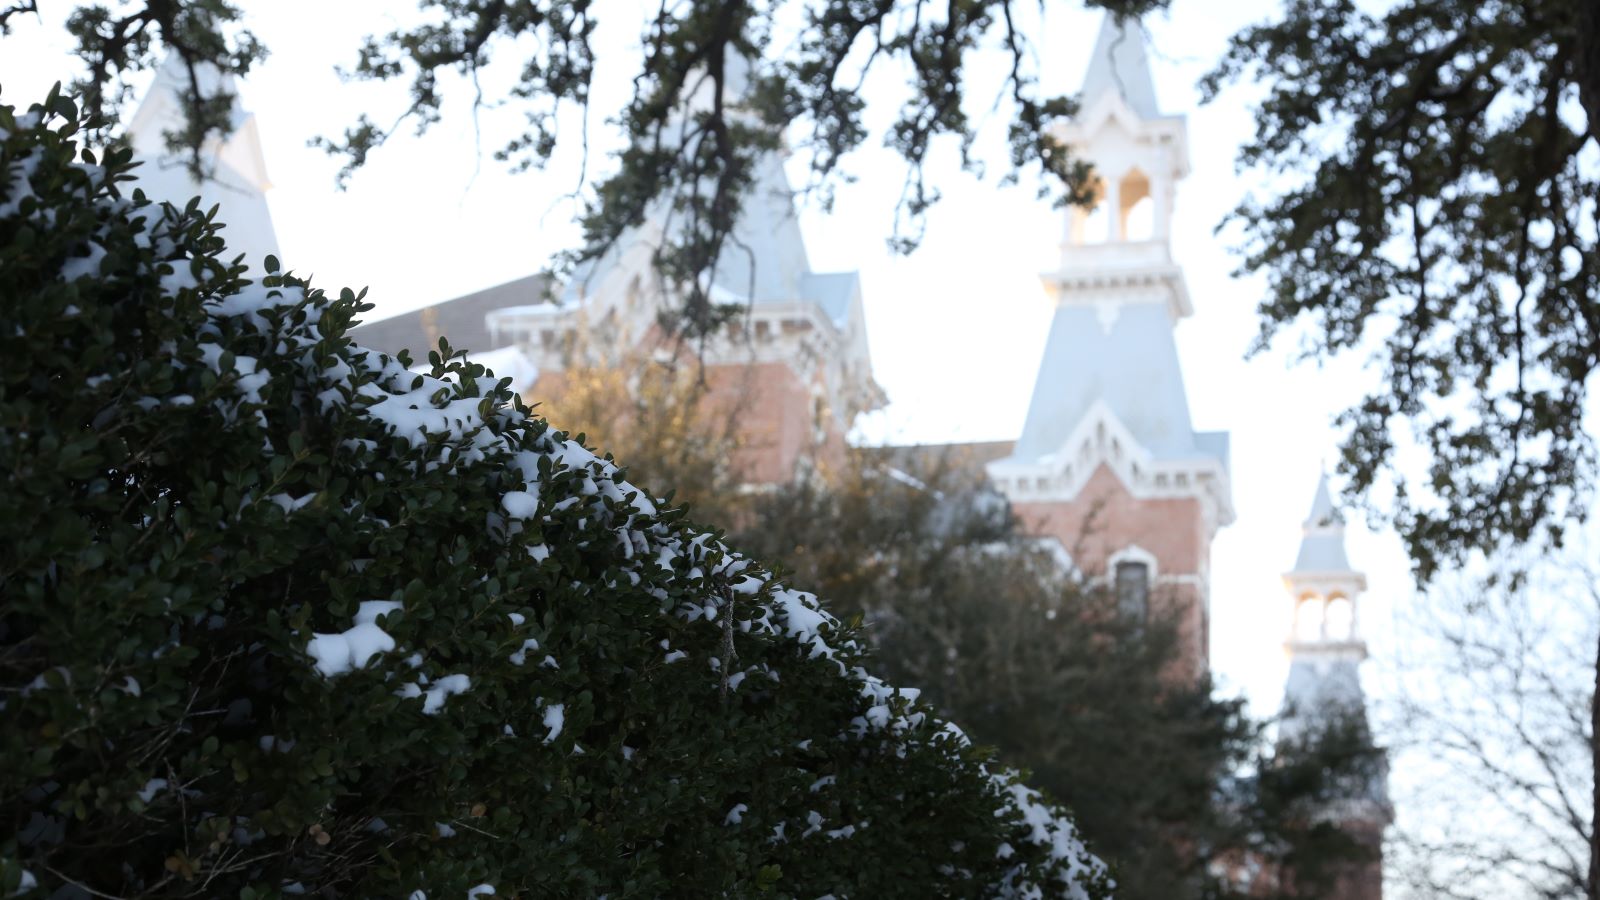 Old Main with some snowflakes on the bushes